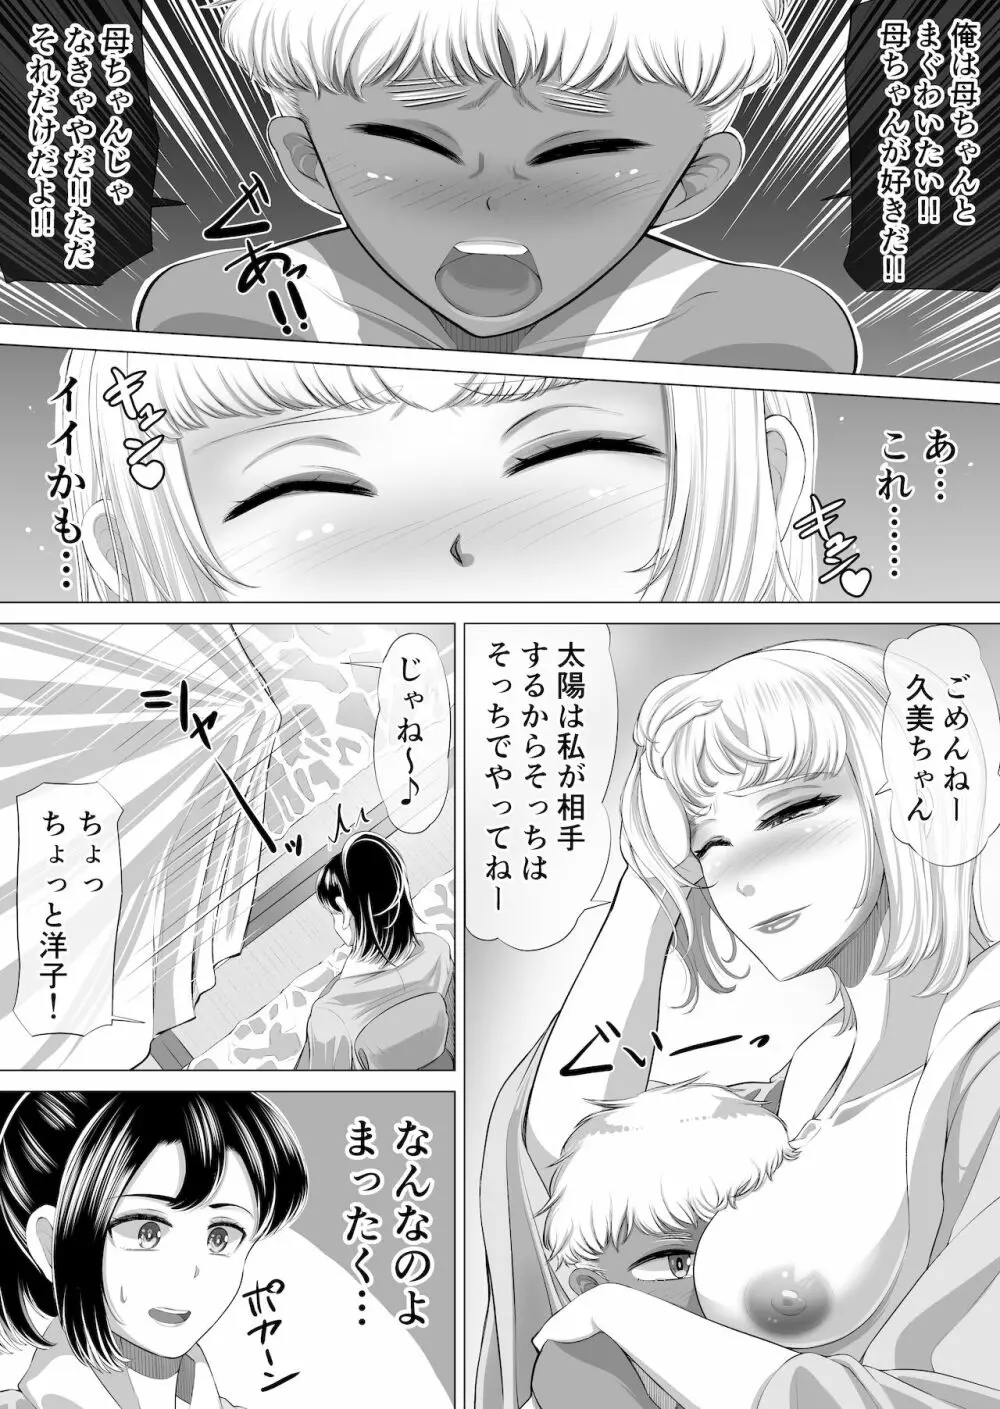 The 神孕村～やっくをやっつけろの巻～ Page.22